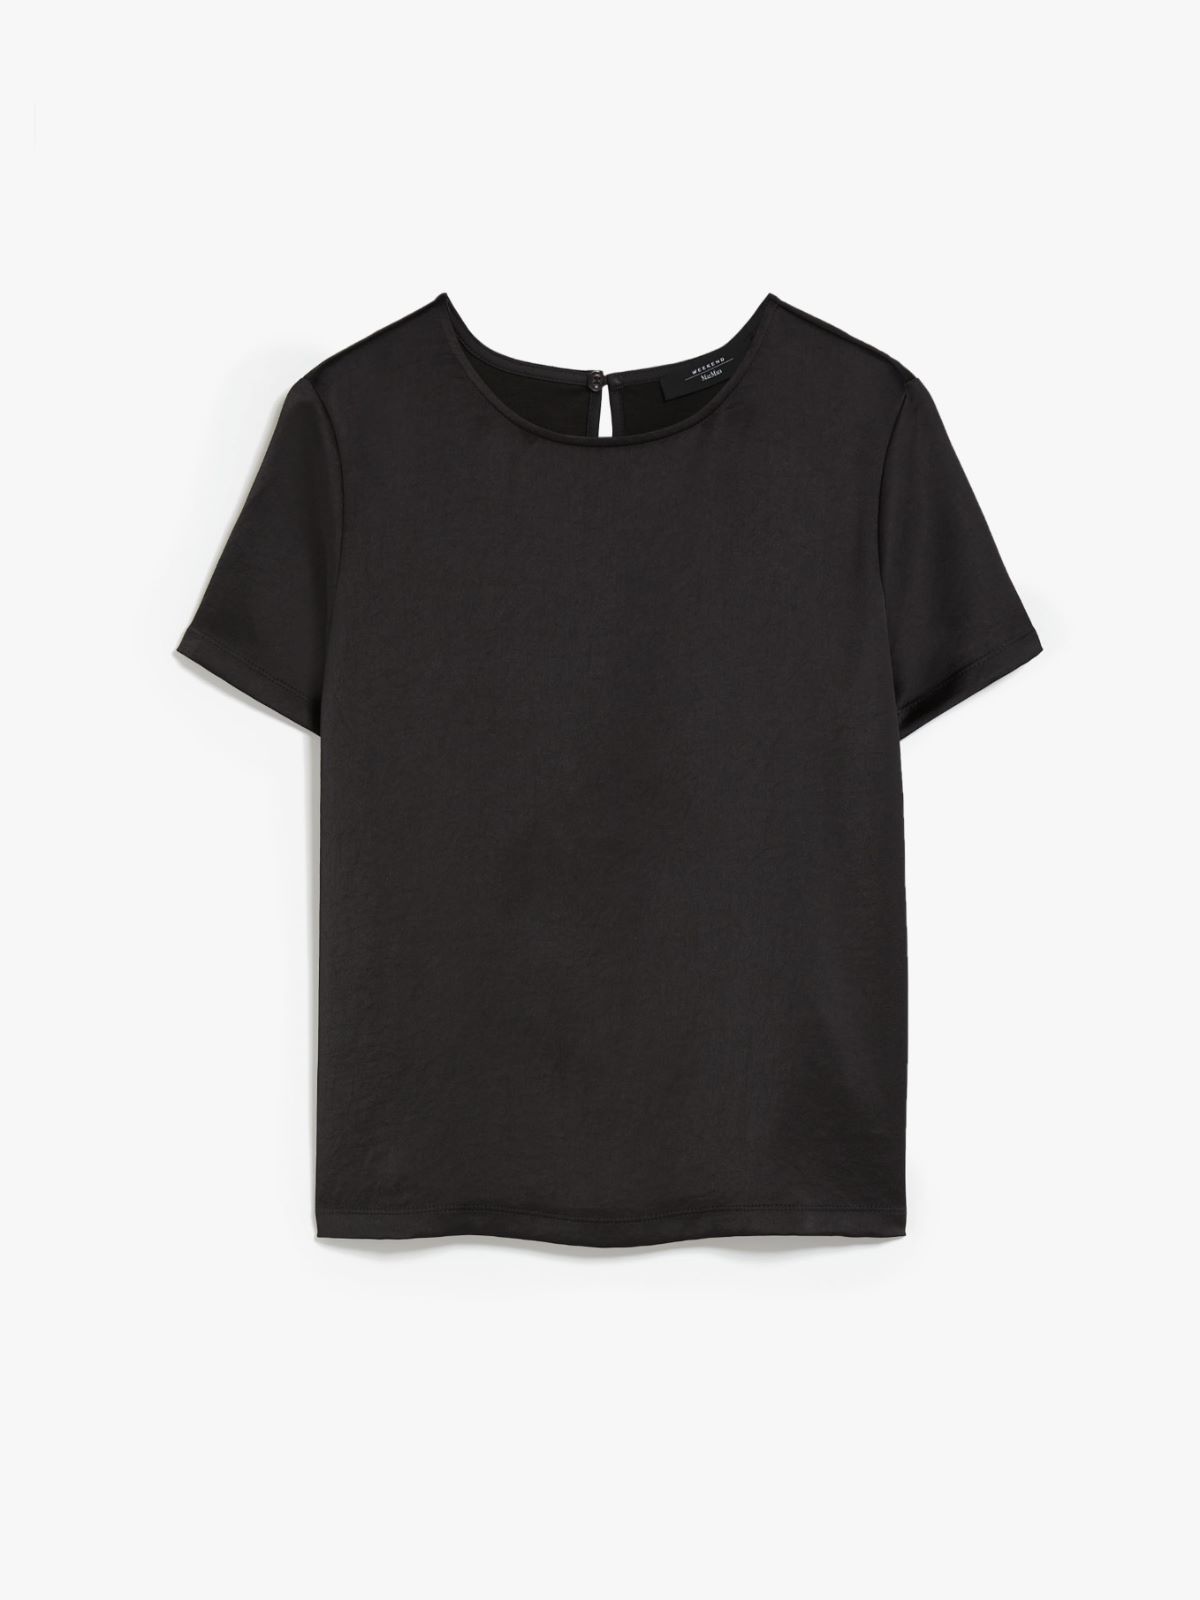 Blouse in satin and jersey, black | Weekend Max Mara